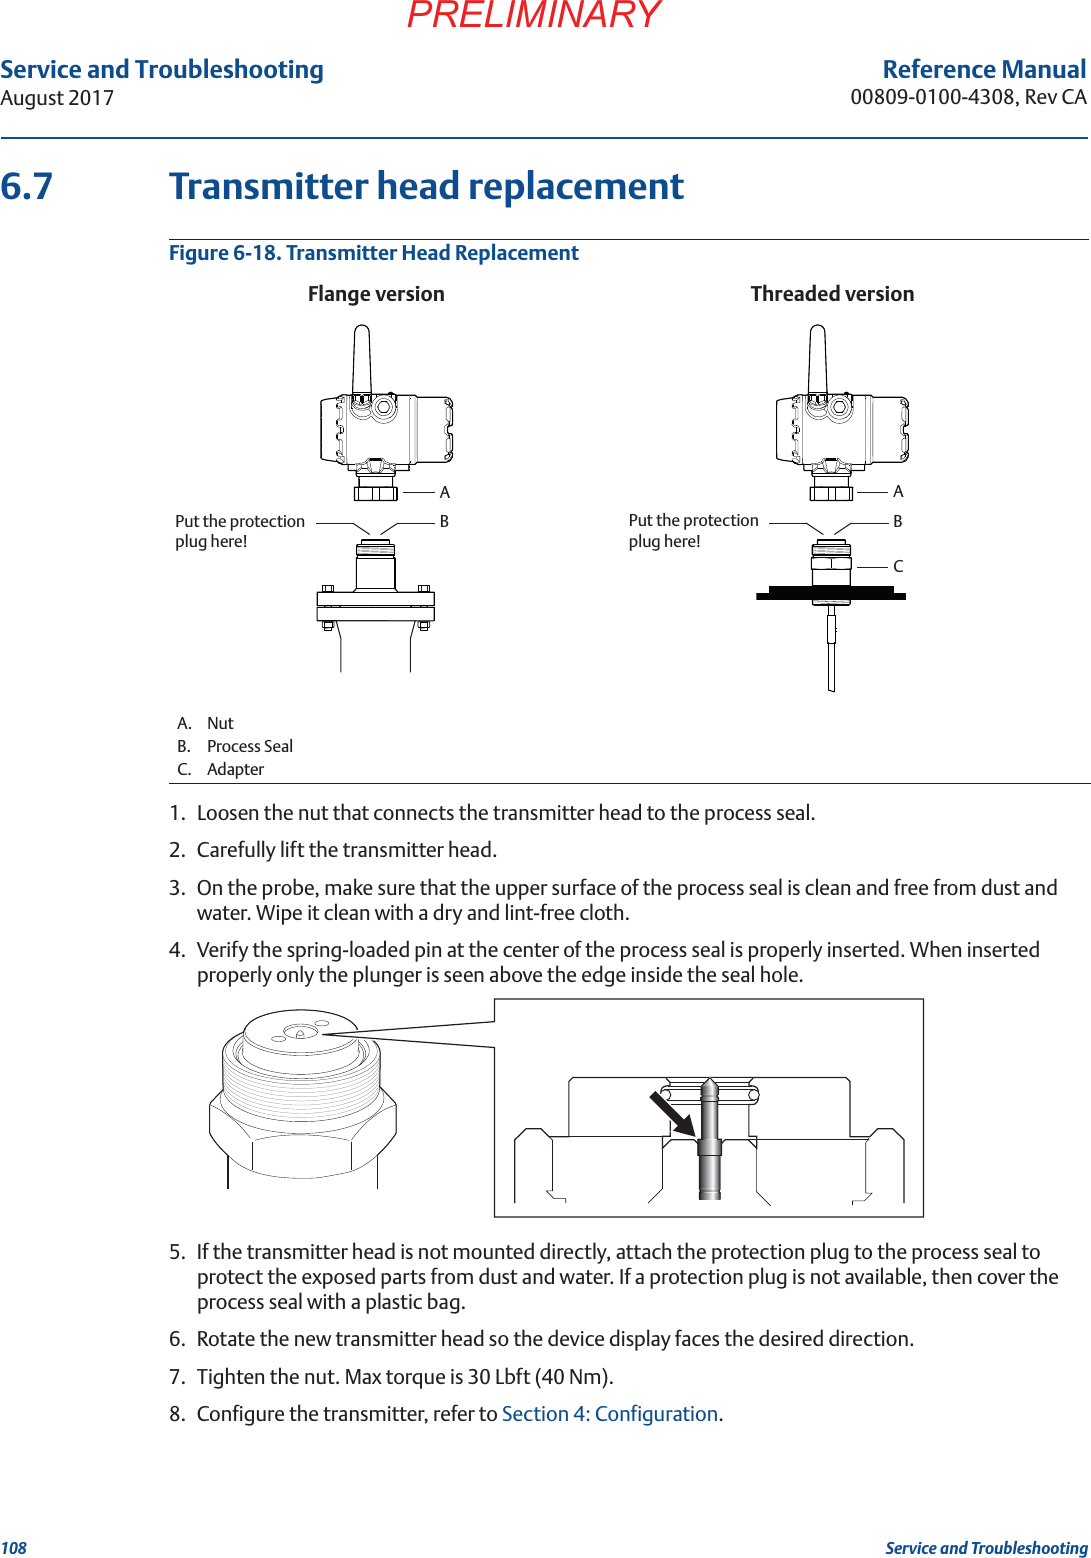 108Service and TroubleshootingAugust 2017Service and TroubleshootingPRELIMINARYReference Manual00809-0100-4308, Rev CA6.7 Transmitter head replacementFigure 6-18. Transmitter Head Replacement1. Loosen the nut that connects the transmitter head to the process seal.2. Carefully lift the transmitter head.3. On the probe, make sure that the upper surface of the process seal is clean and free from dust and water. Wipe it clean with a dry and lint-free cloth.4. Verify the spring-loaded pin at the center of the process seal is properly inserted. When inserted properly only the plunger is seen above the edge inside the seal hole.5. If the transmitter head is not mounted directly, attach the protection plug to the process seal to protect the exposed parts from dust and water. If a protection plug is not available, then cover the process seal with a plastic bag.6. Rotate the new transmitter head so the device display faces the desired direction.7. Tighten the nut. Max torque is 30 Lbft (40 Nm).8. Configure the transmitter, refer to Section 4: Configuration.A. NutB. Process SealC. AdapterThreaded versionAPut the protection plug here!Flange versionBAPut the protection plug here!BC